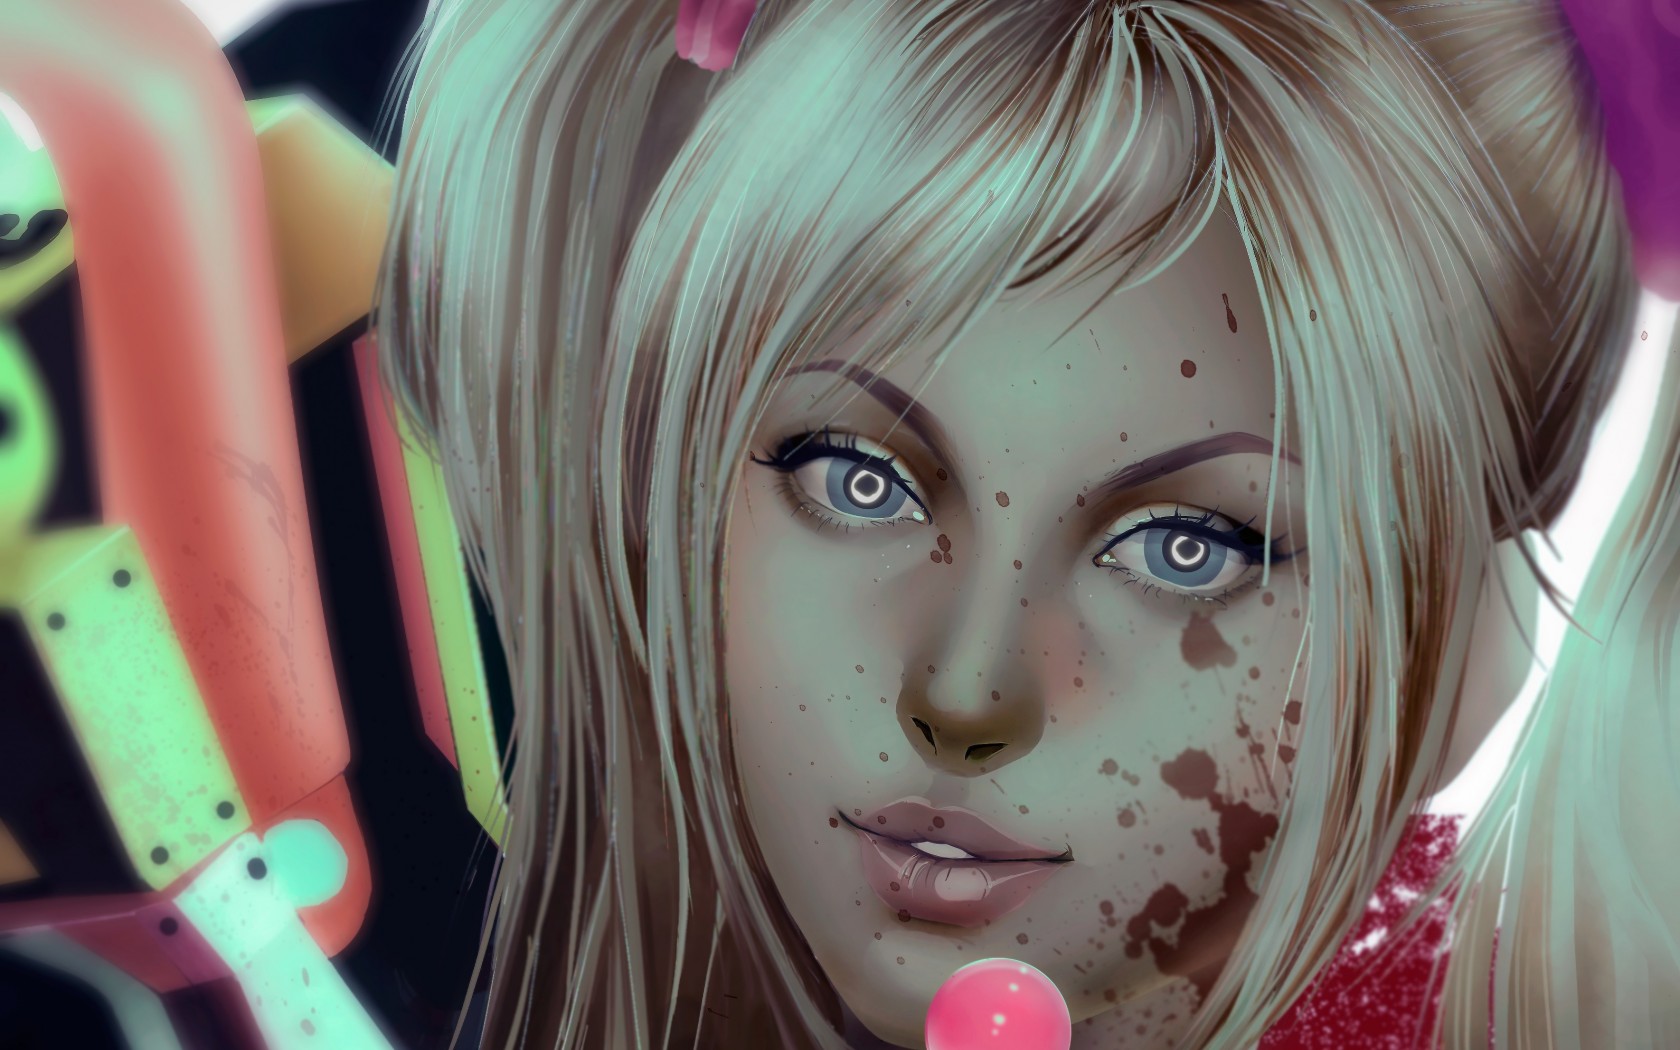 Lollipop Chainsaw Action X360 Wallpaper Hd Games 4k Wallpapers Images Photos And Background Wallpapers Den